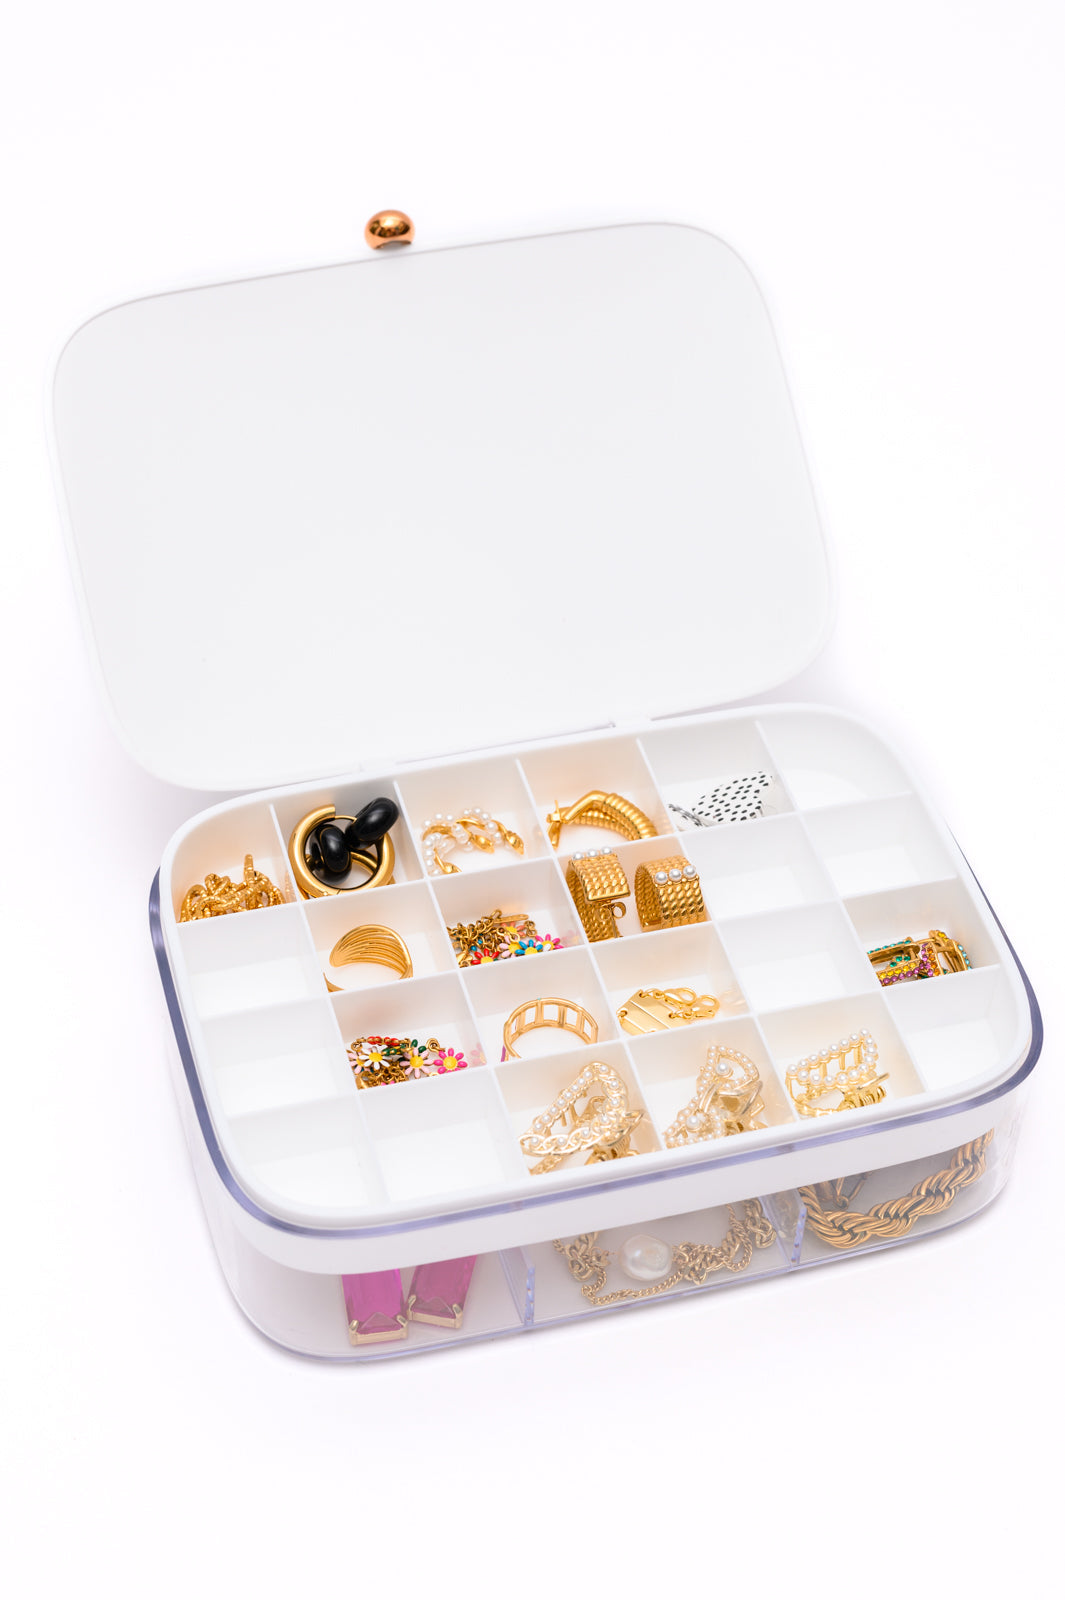 All Sorted Out Jewelry Storage Case ~ Online Exclusive